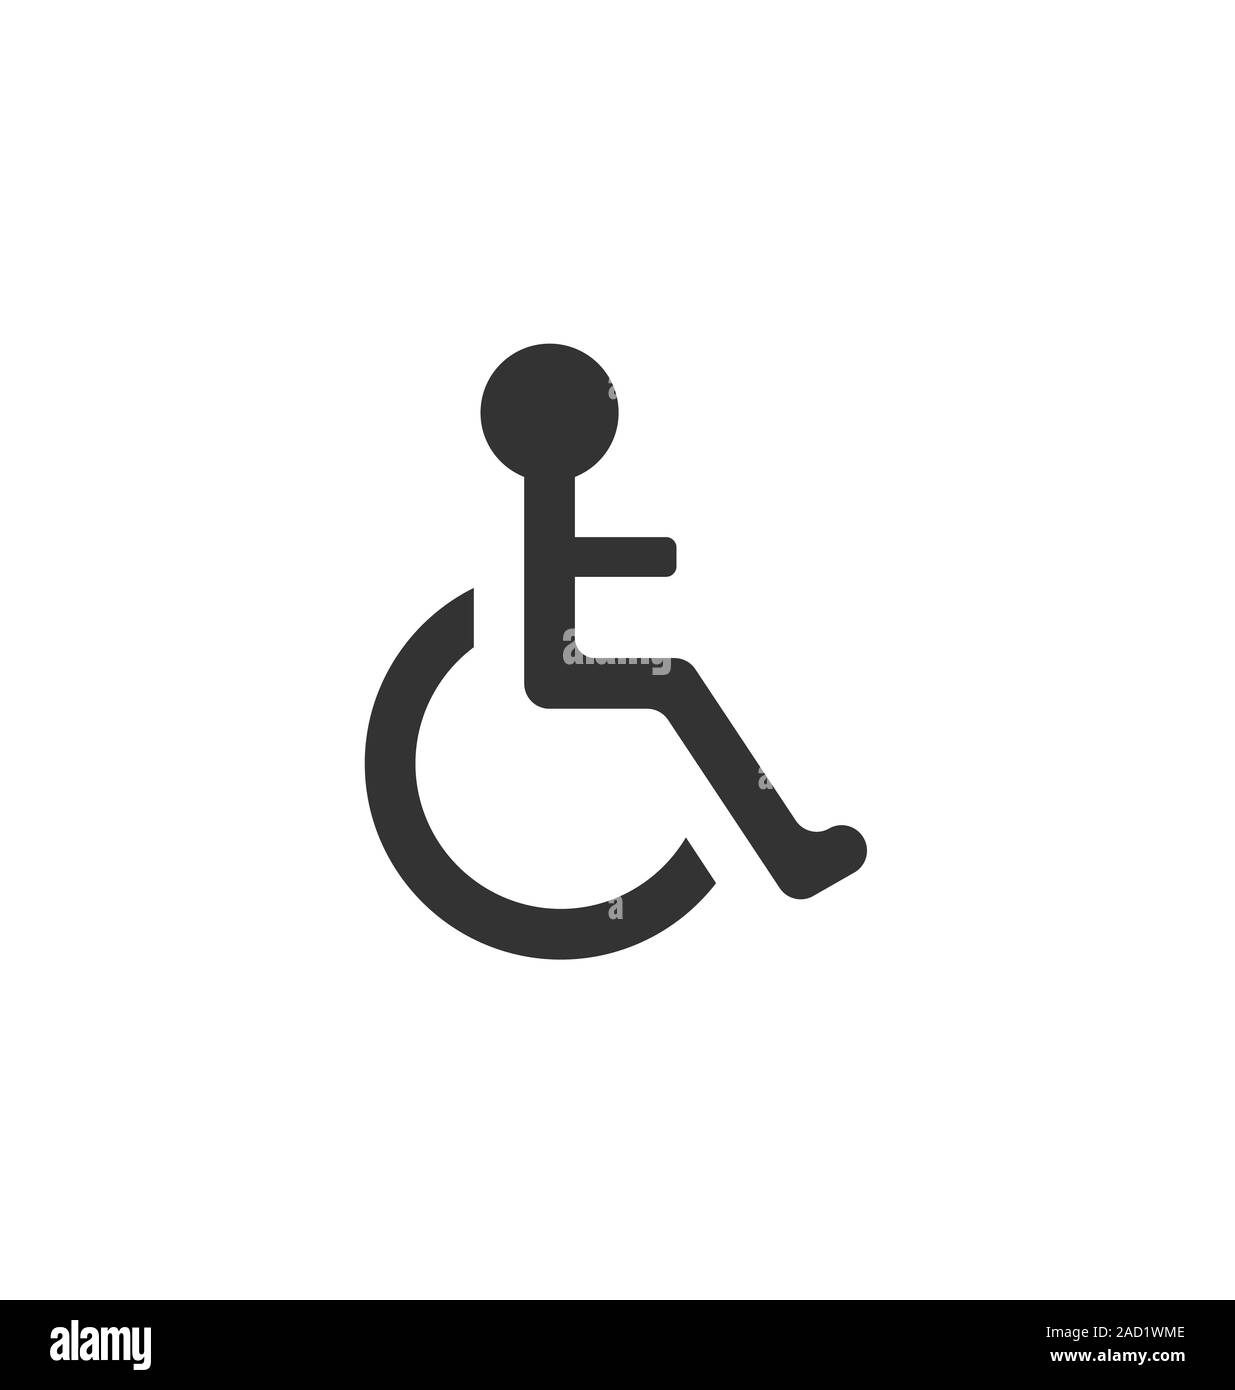 Care for disabled Black and White Stock Photos & Images - Alamy